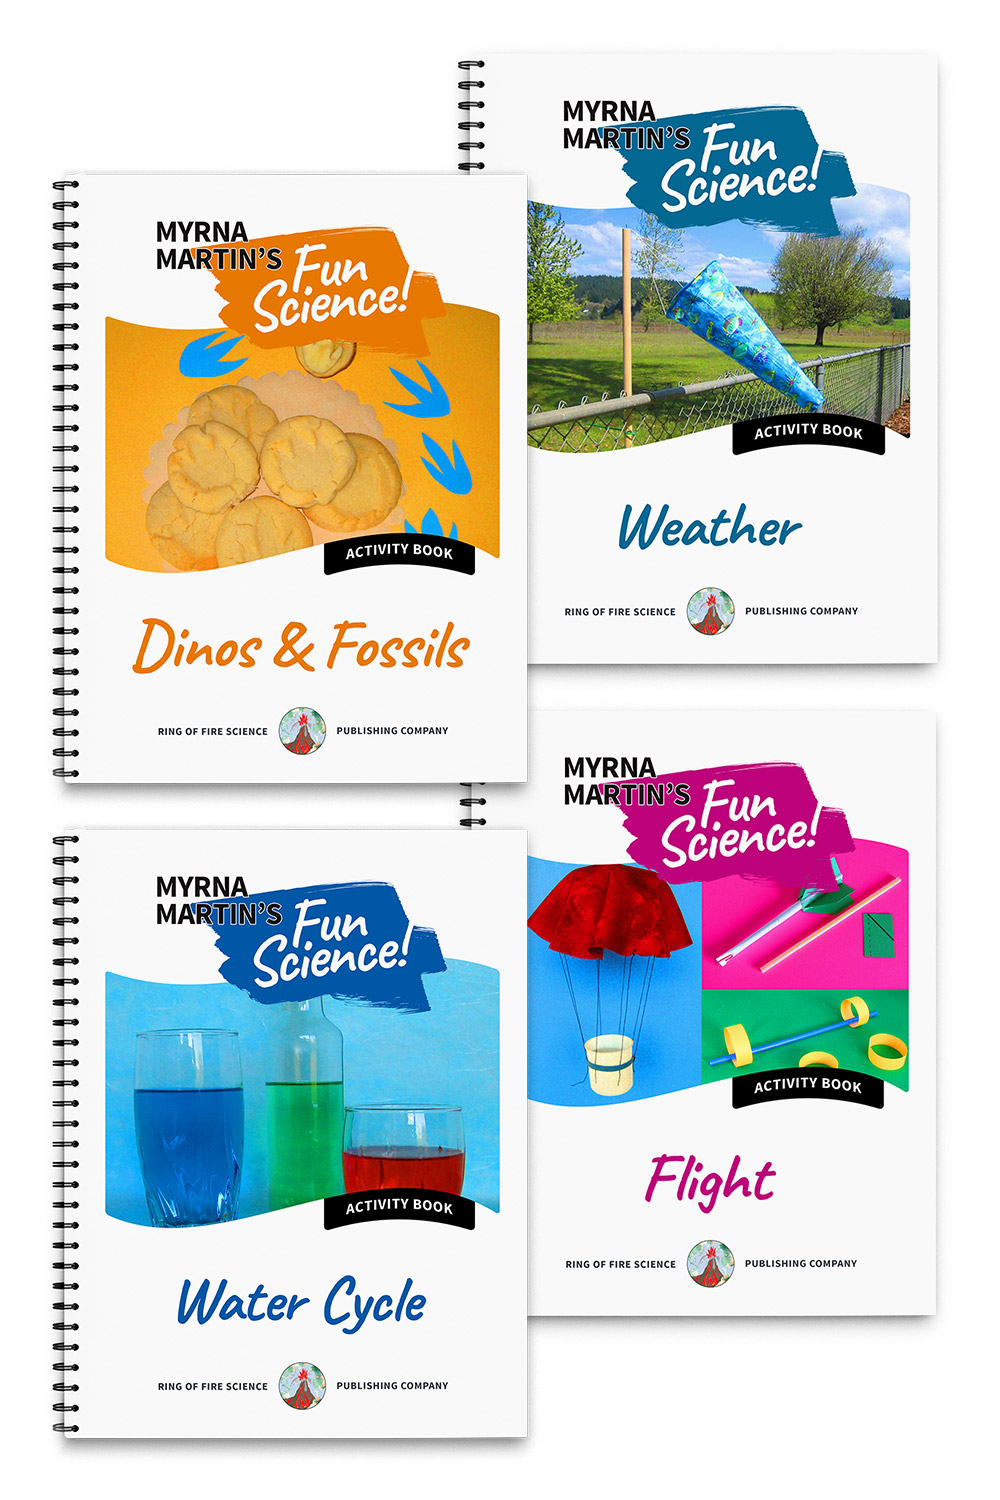 Fun Science Activities Book Package 2 by Myrna Martin